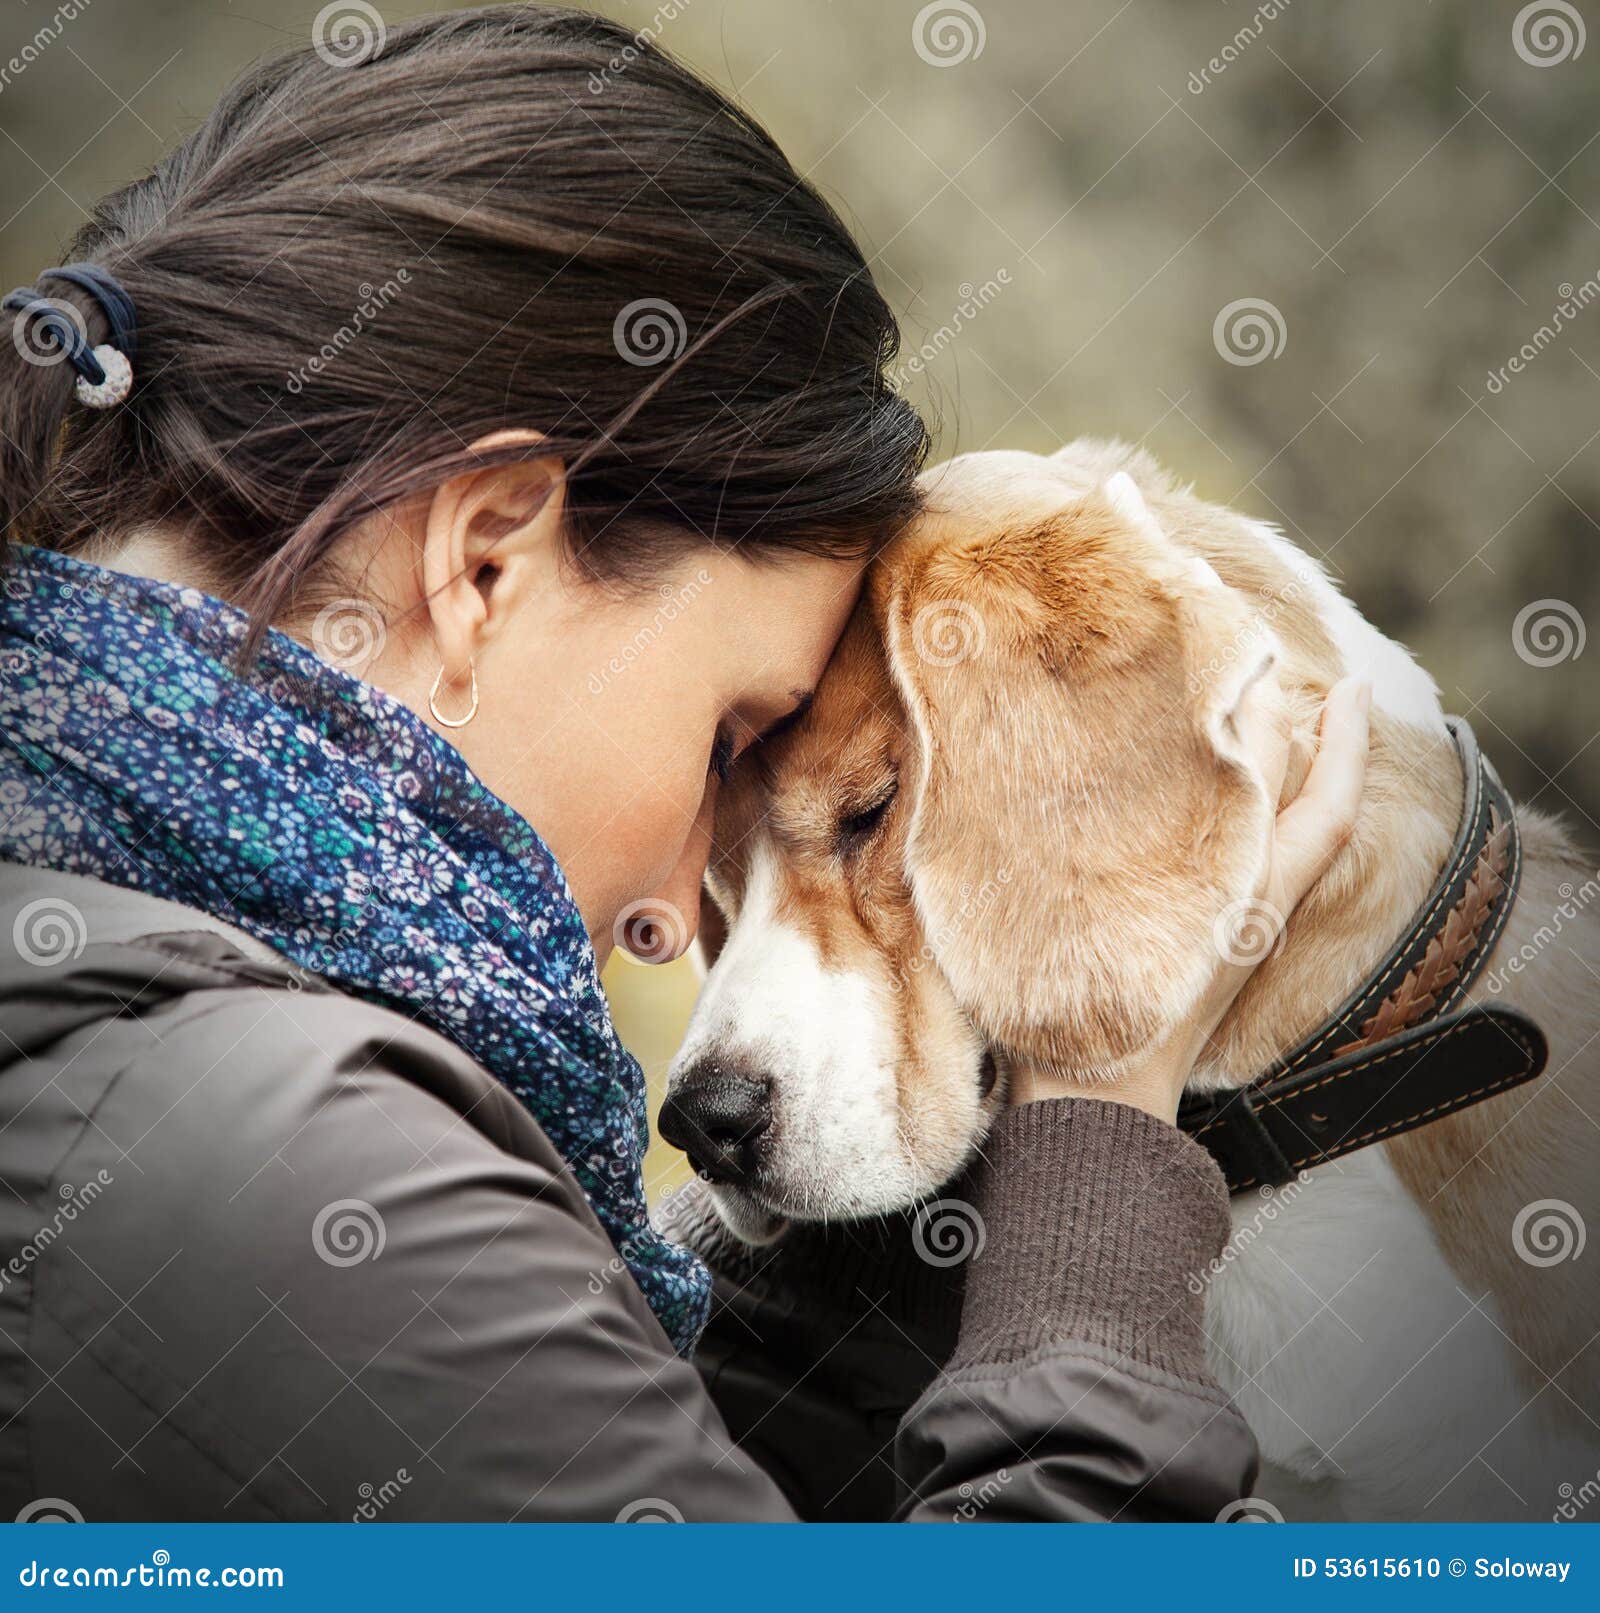 woman with her dog tender scene